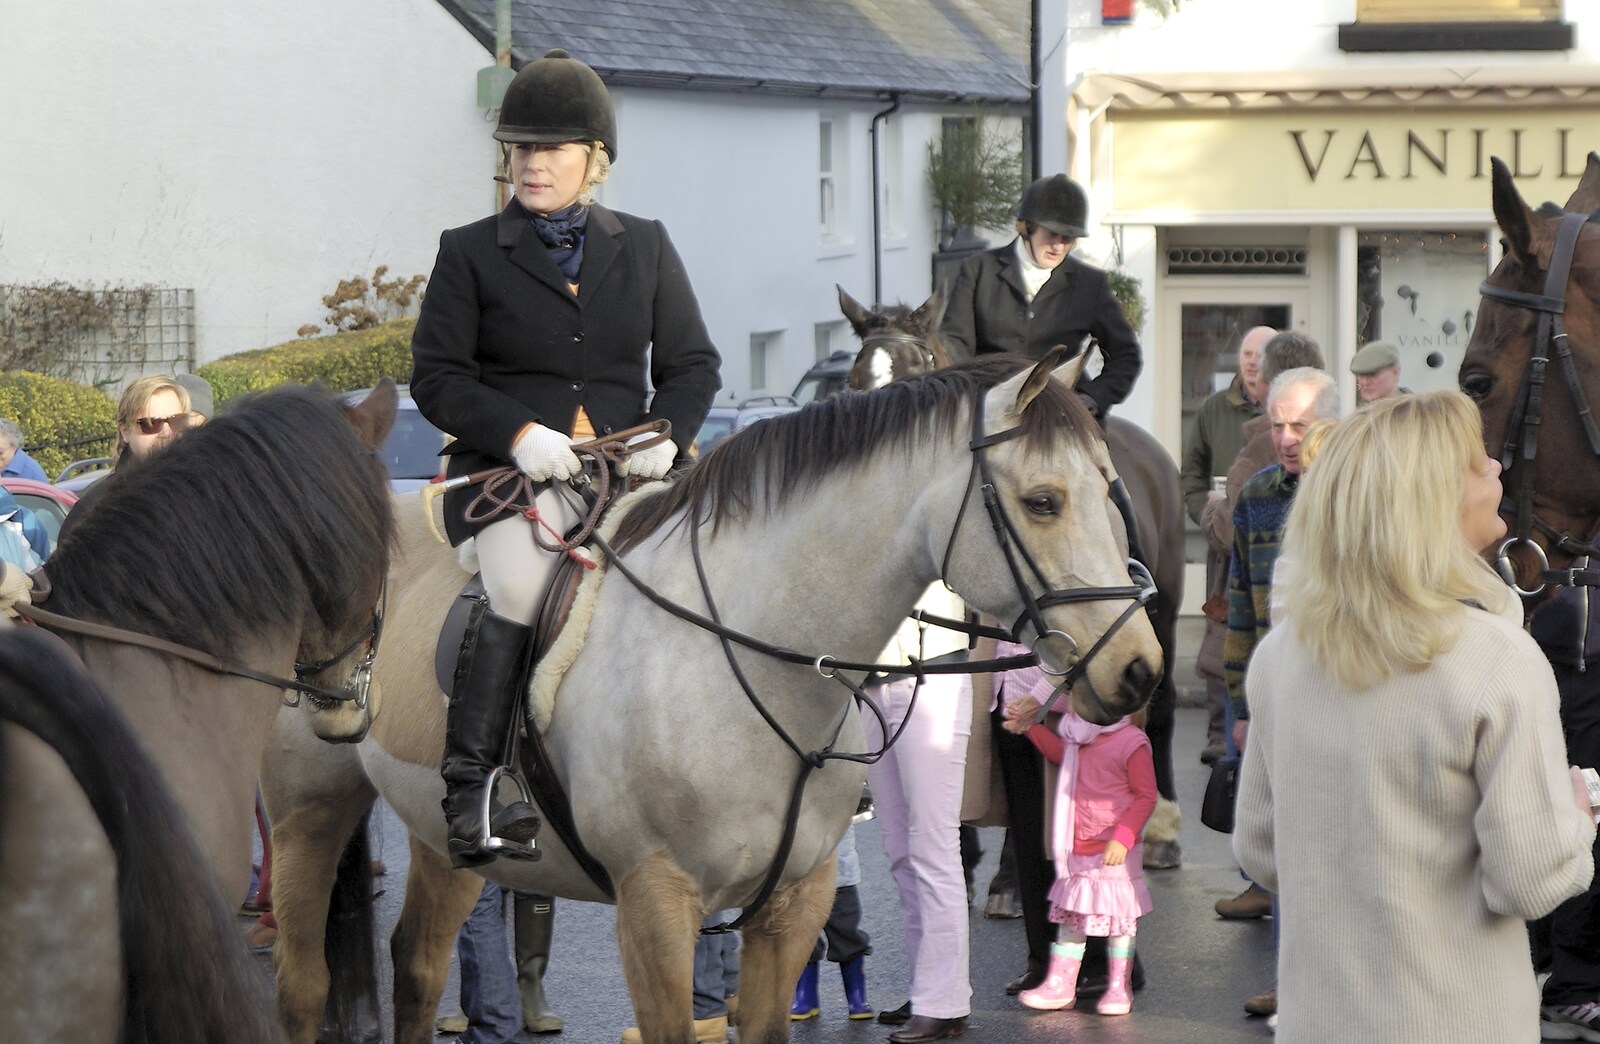 Jennifer Saunders and her rather nice horse from A Boxing Day Hunt, Chagford, Devon - 26th December 2007